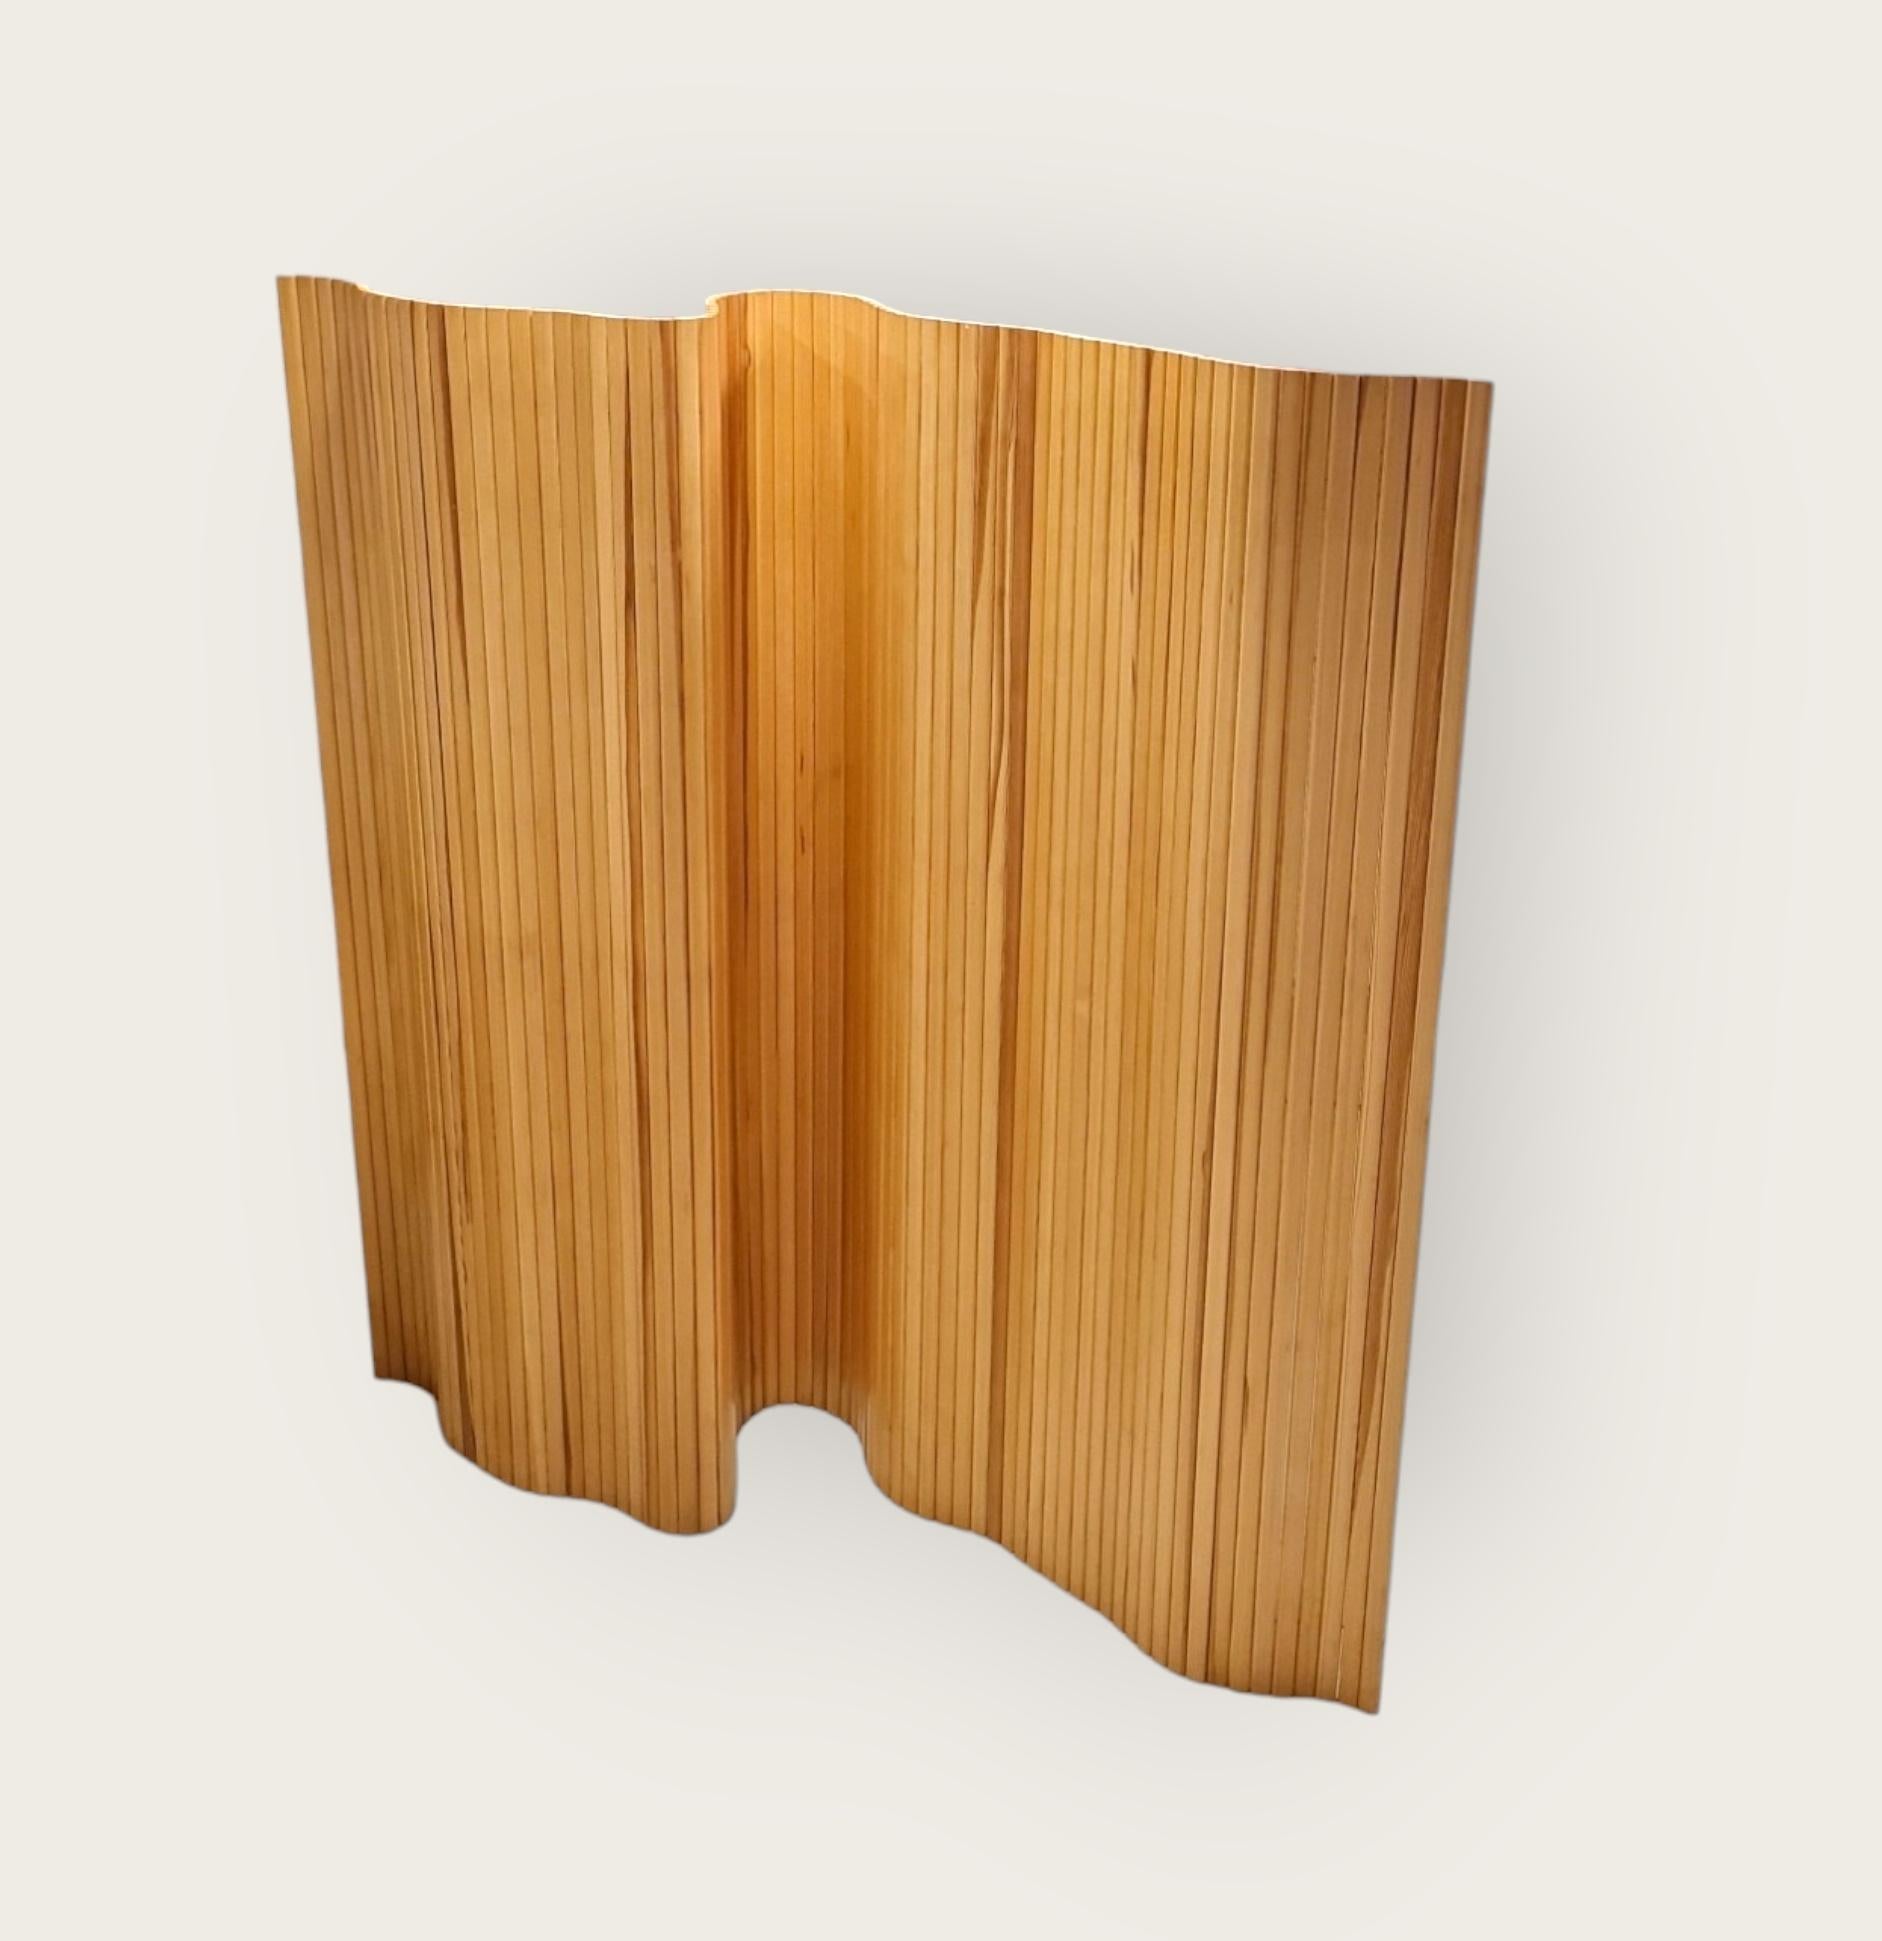 
The 100 slatted wall / room divider by Alvar Aalto is a dynamic interior element assembled from narrow vertical pine slats and can be rolled up and opened as a straight or in numerous curved positions. At 150-centimeter-high, the slatted wall